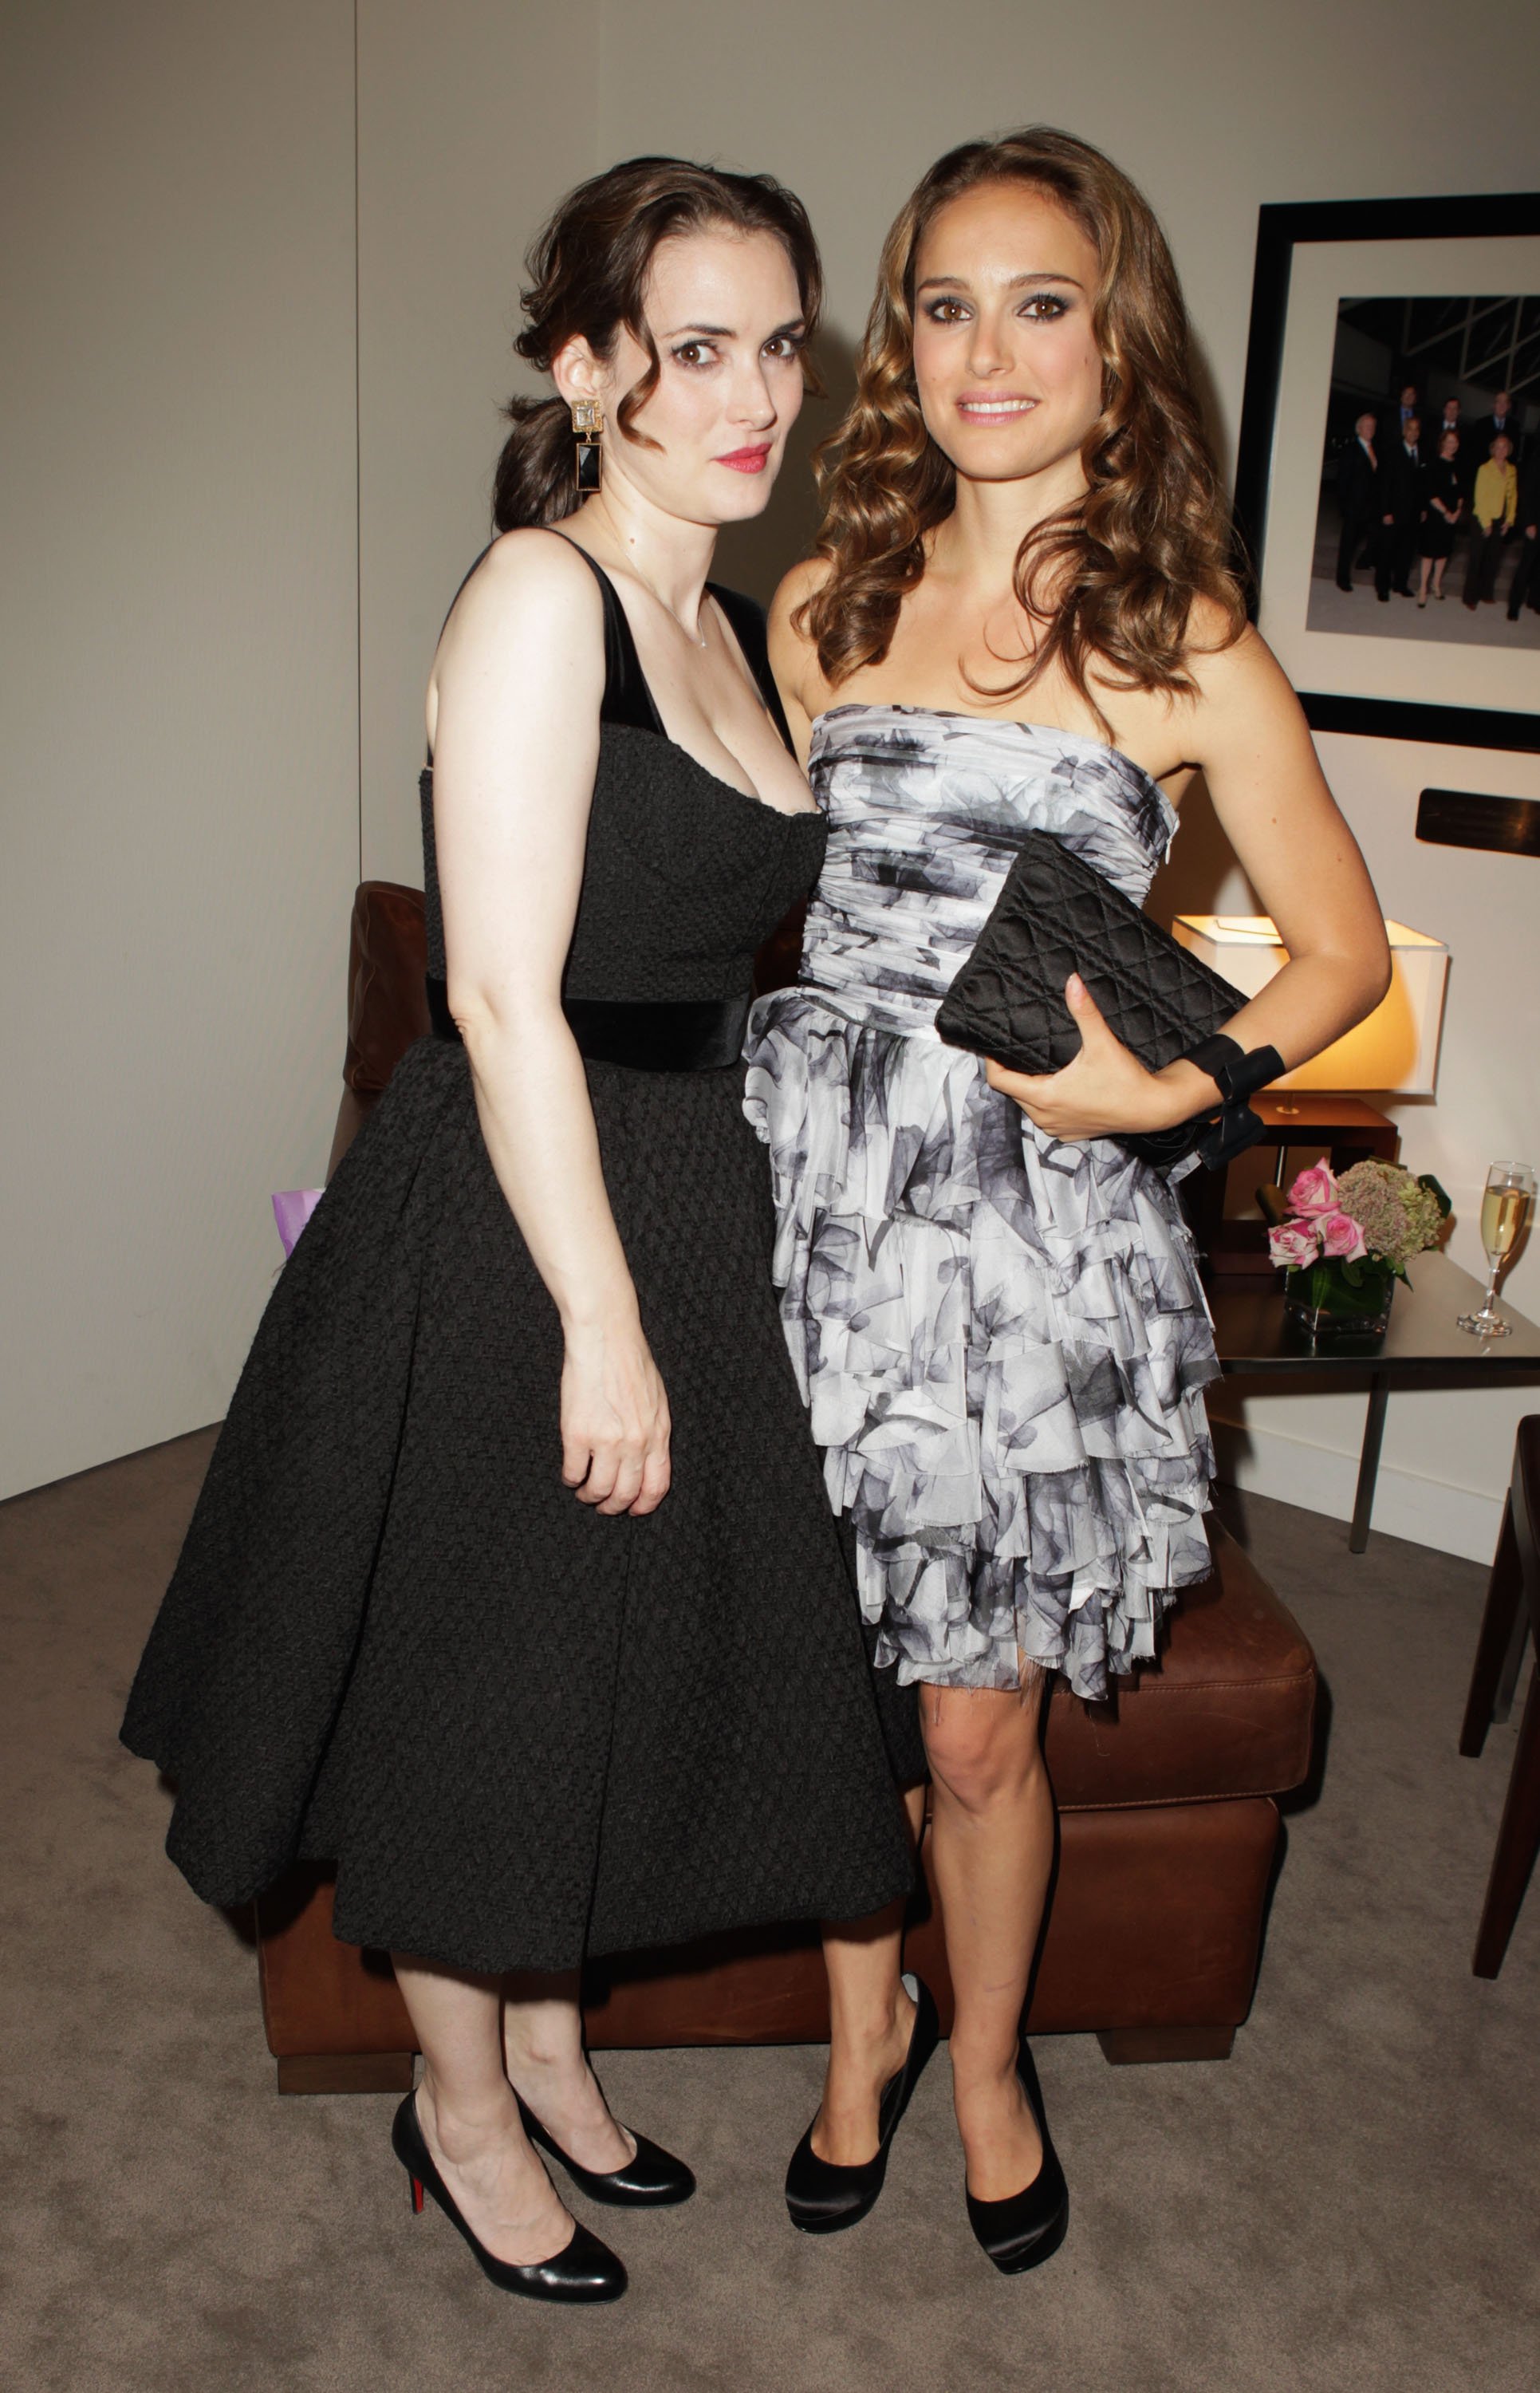 Winona Ryder and Natalie Portman attend the 'Black Swan' Premiere